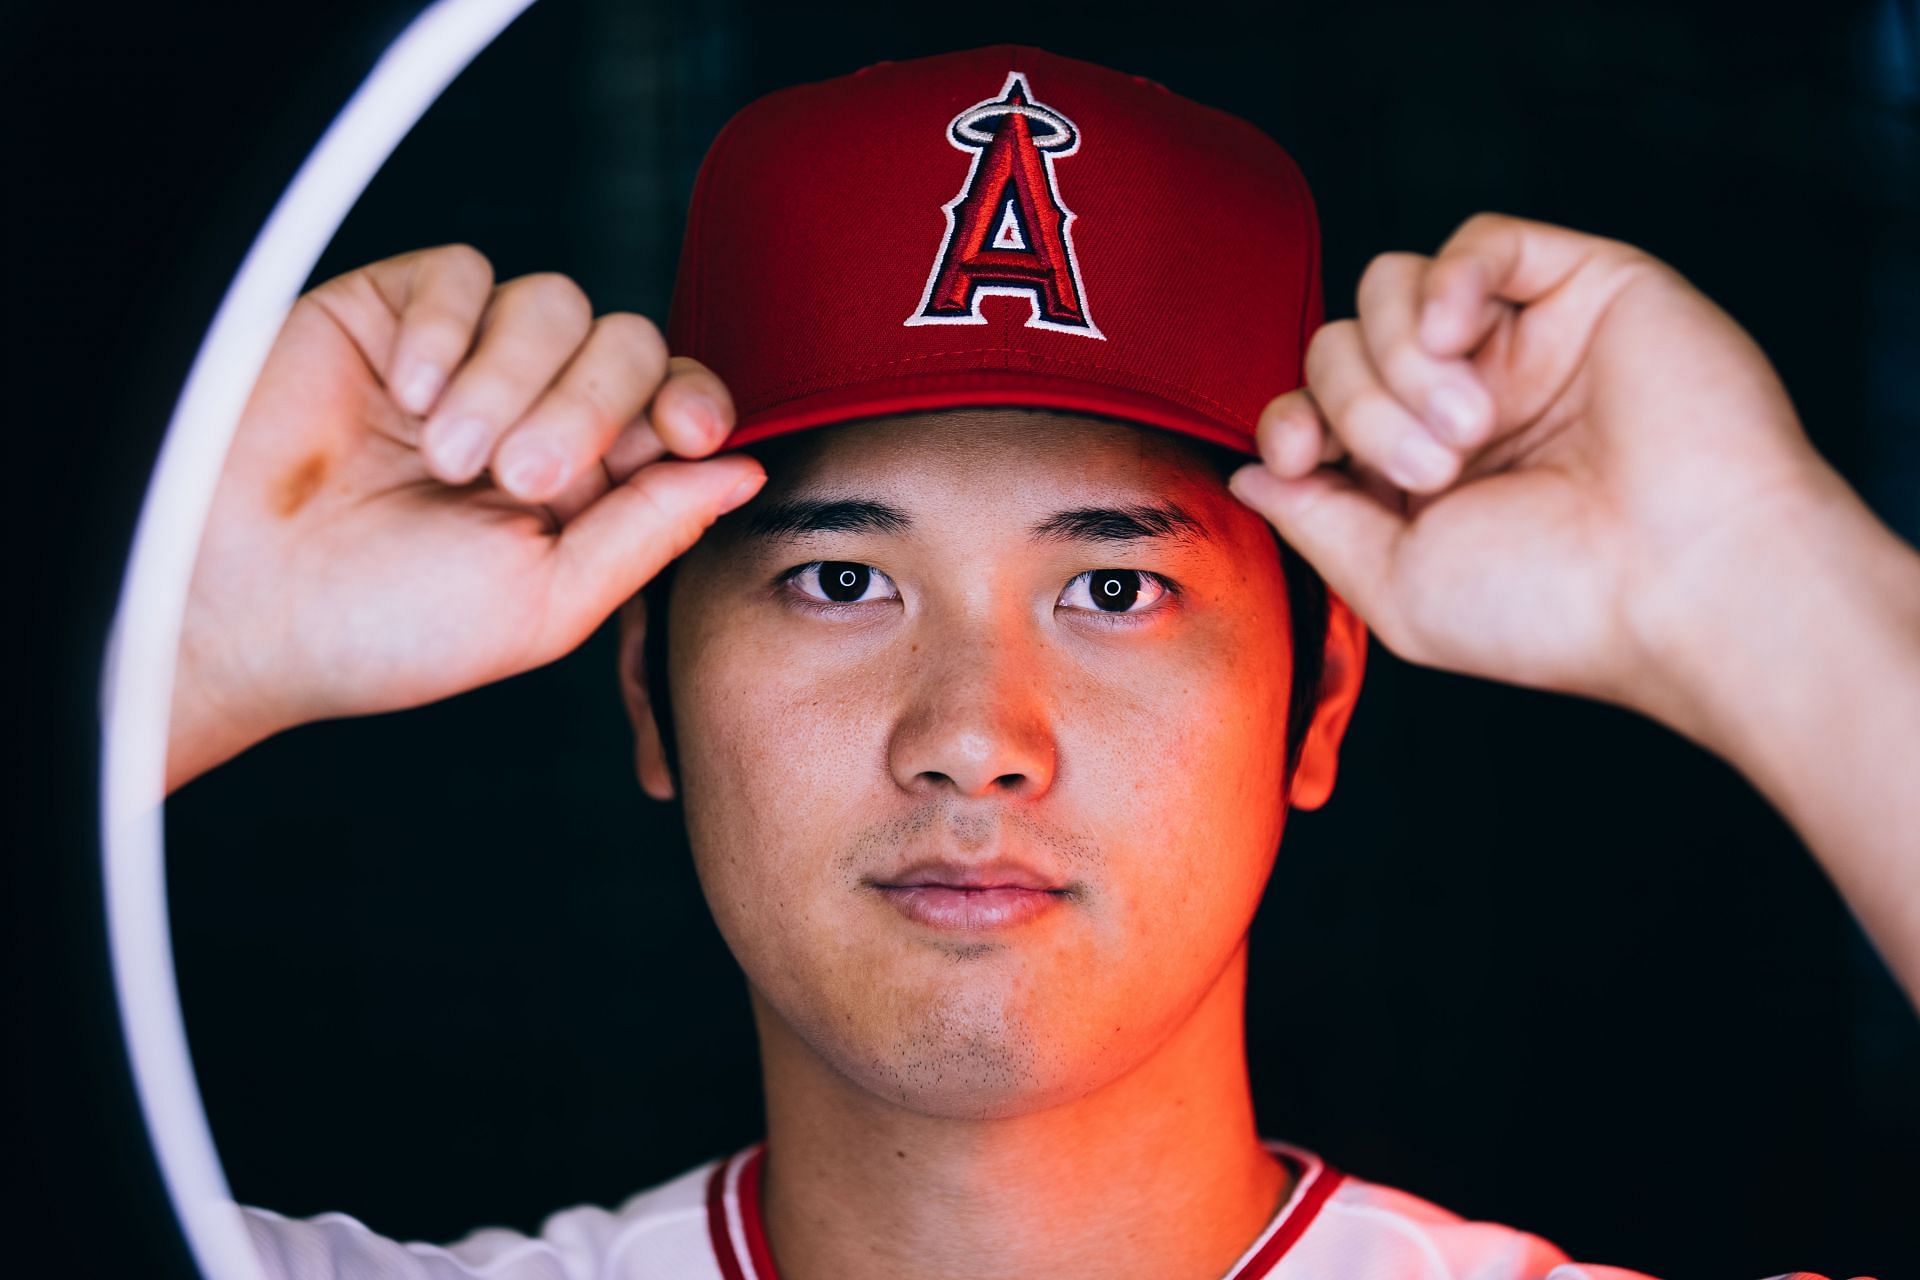 Shohei Ohtani, picked as the No. 1 best player in baseball by MLB